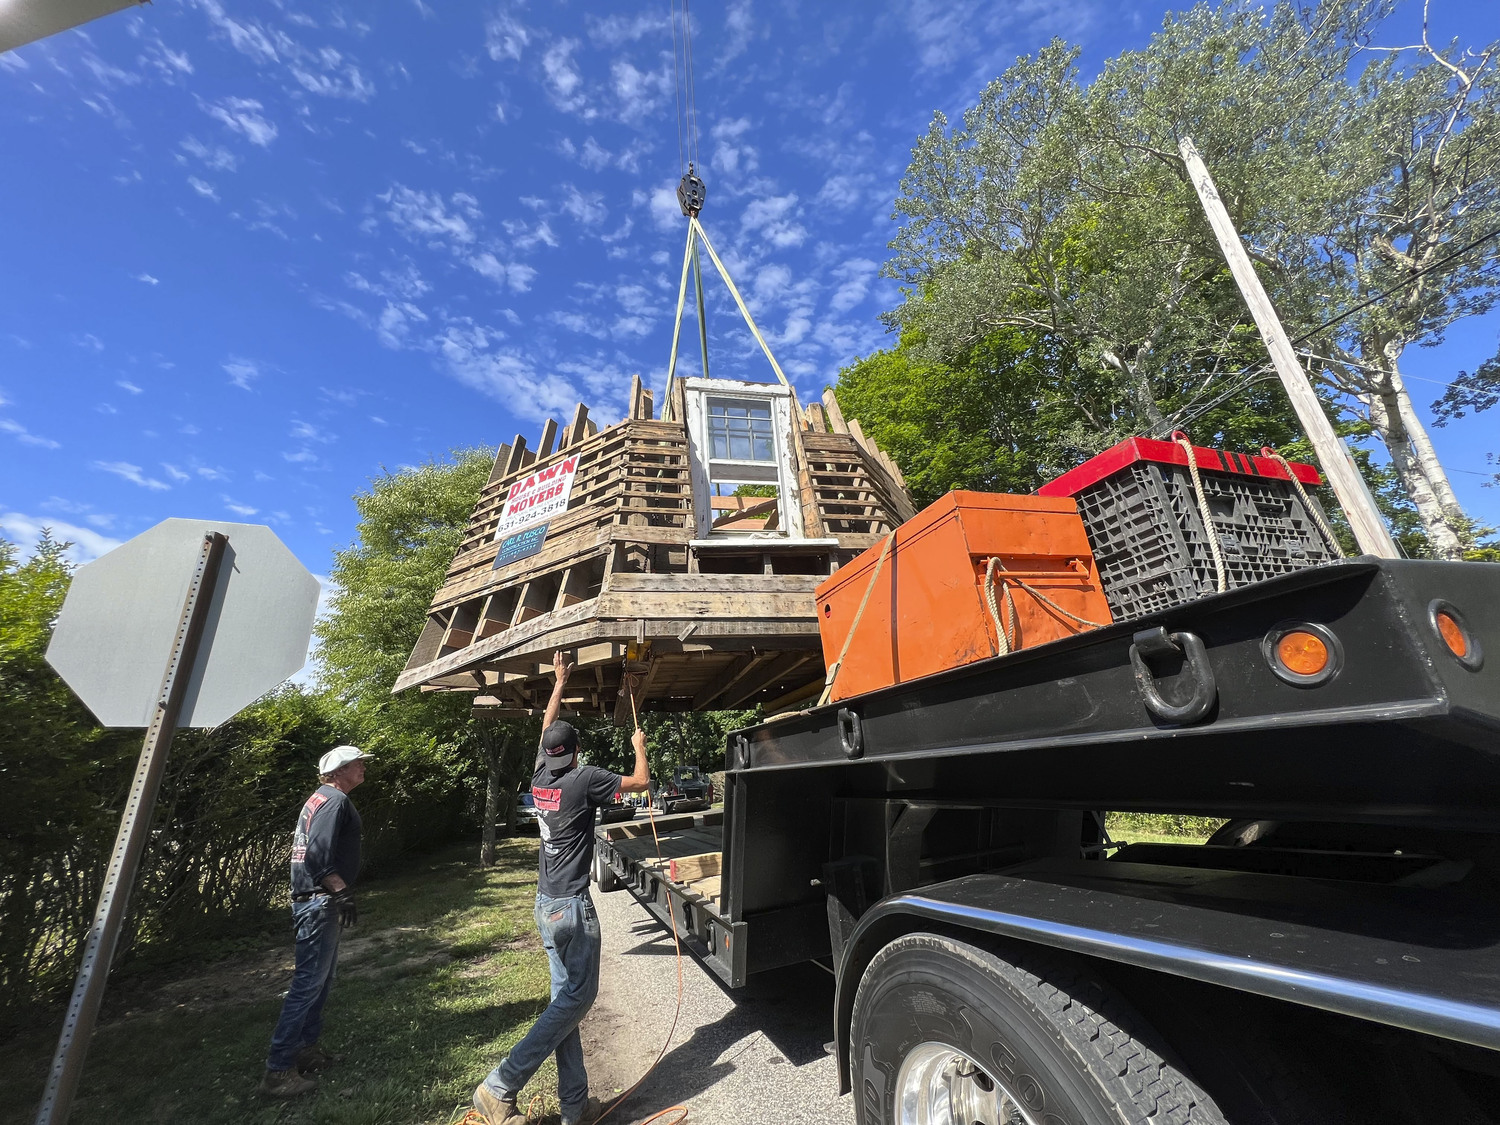 The Dix windmill being moved from its former location to the Great Lawn on July 7, 2022.  DANA SHAW